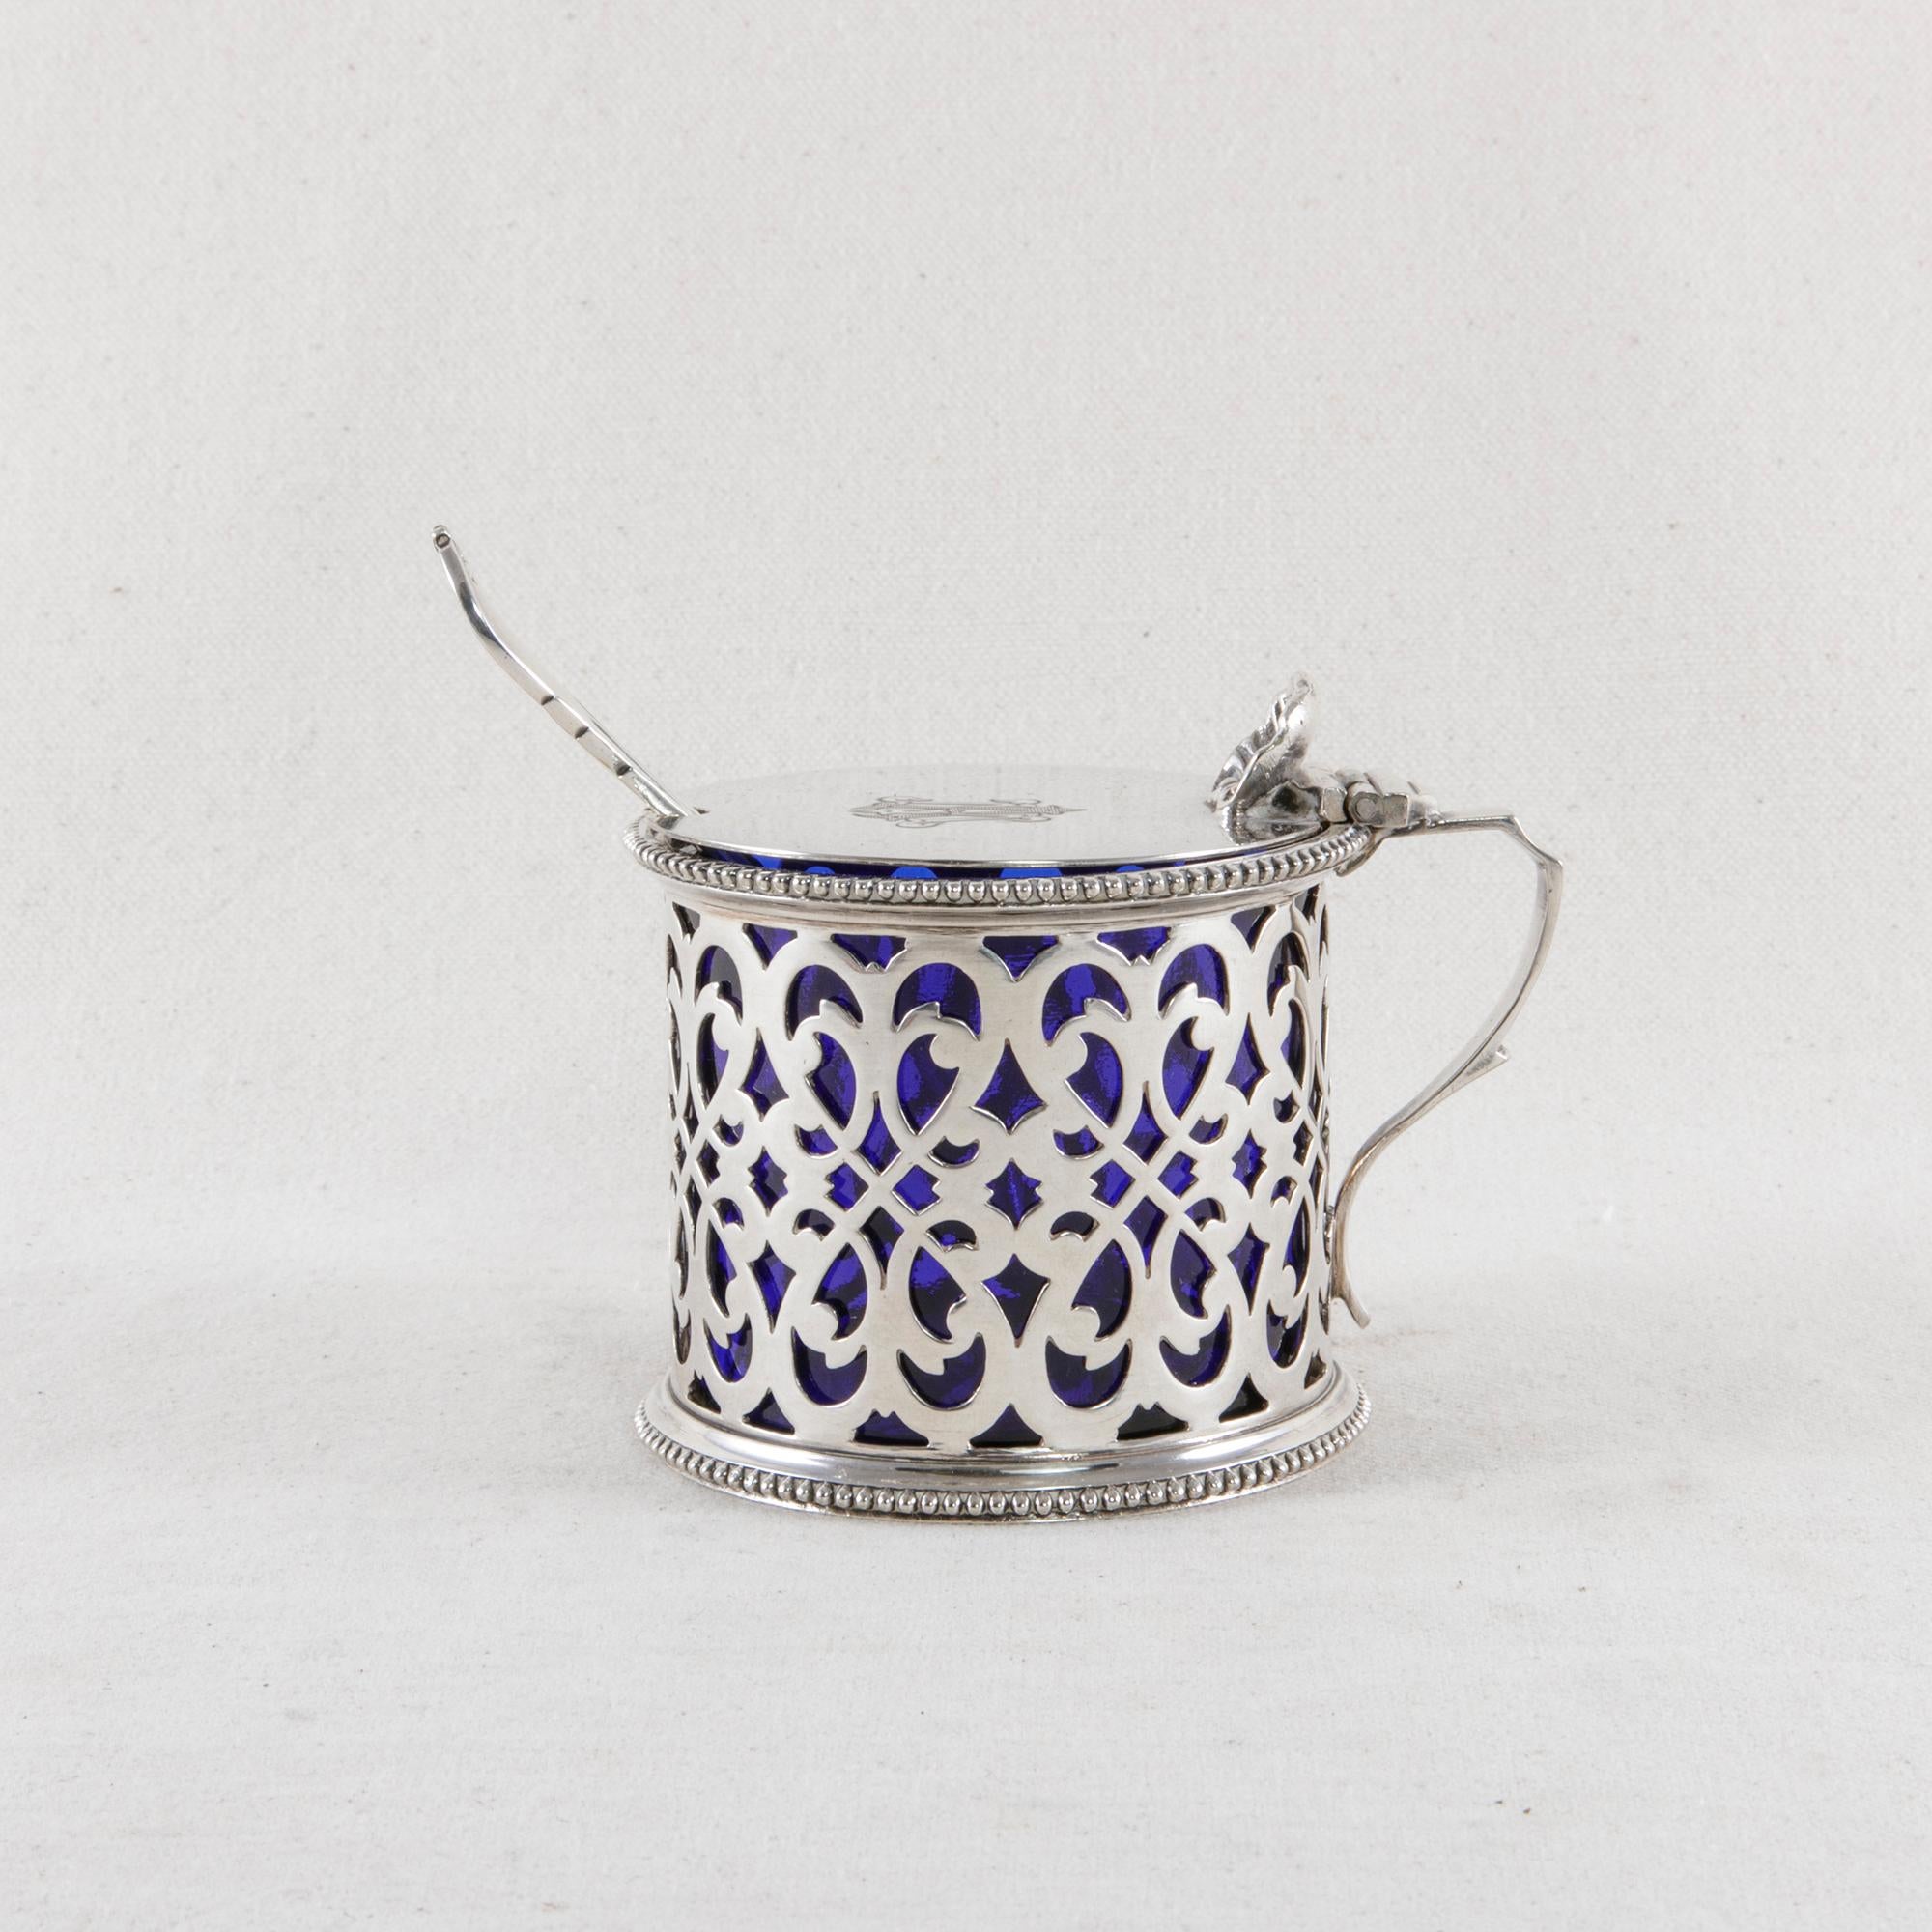 Late 19th Century English Silver Plate Mustard Pot with Lid Spoon, Glass Insert 1